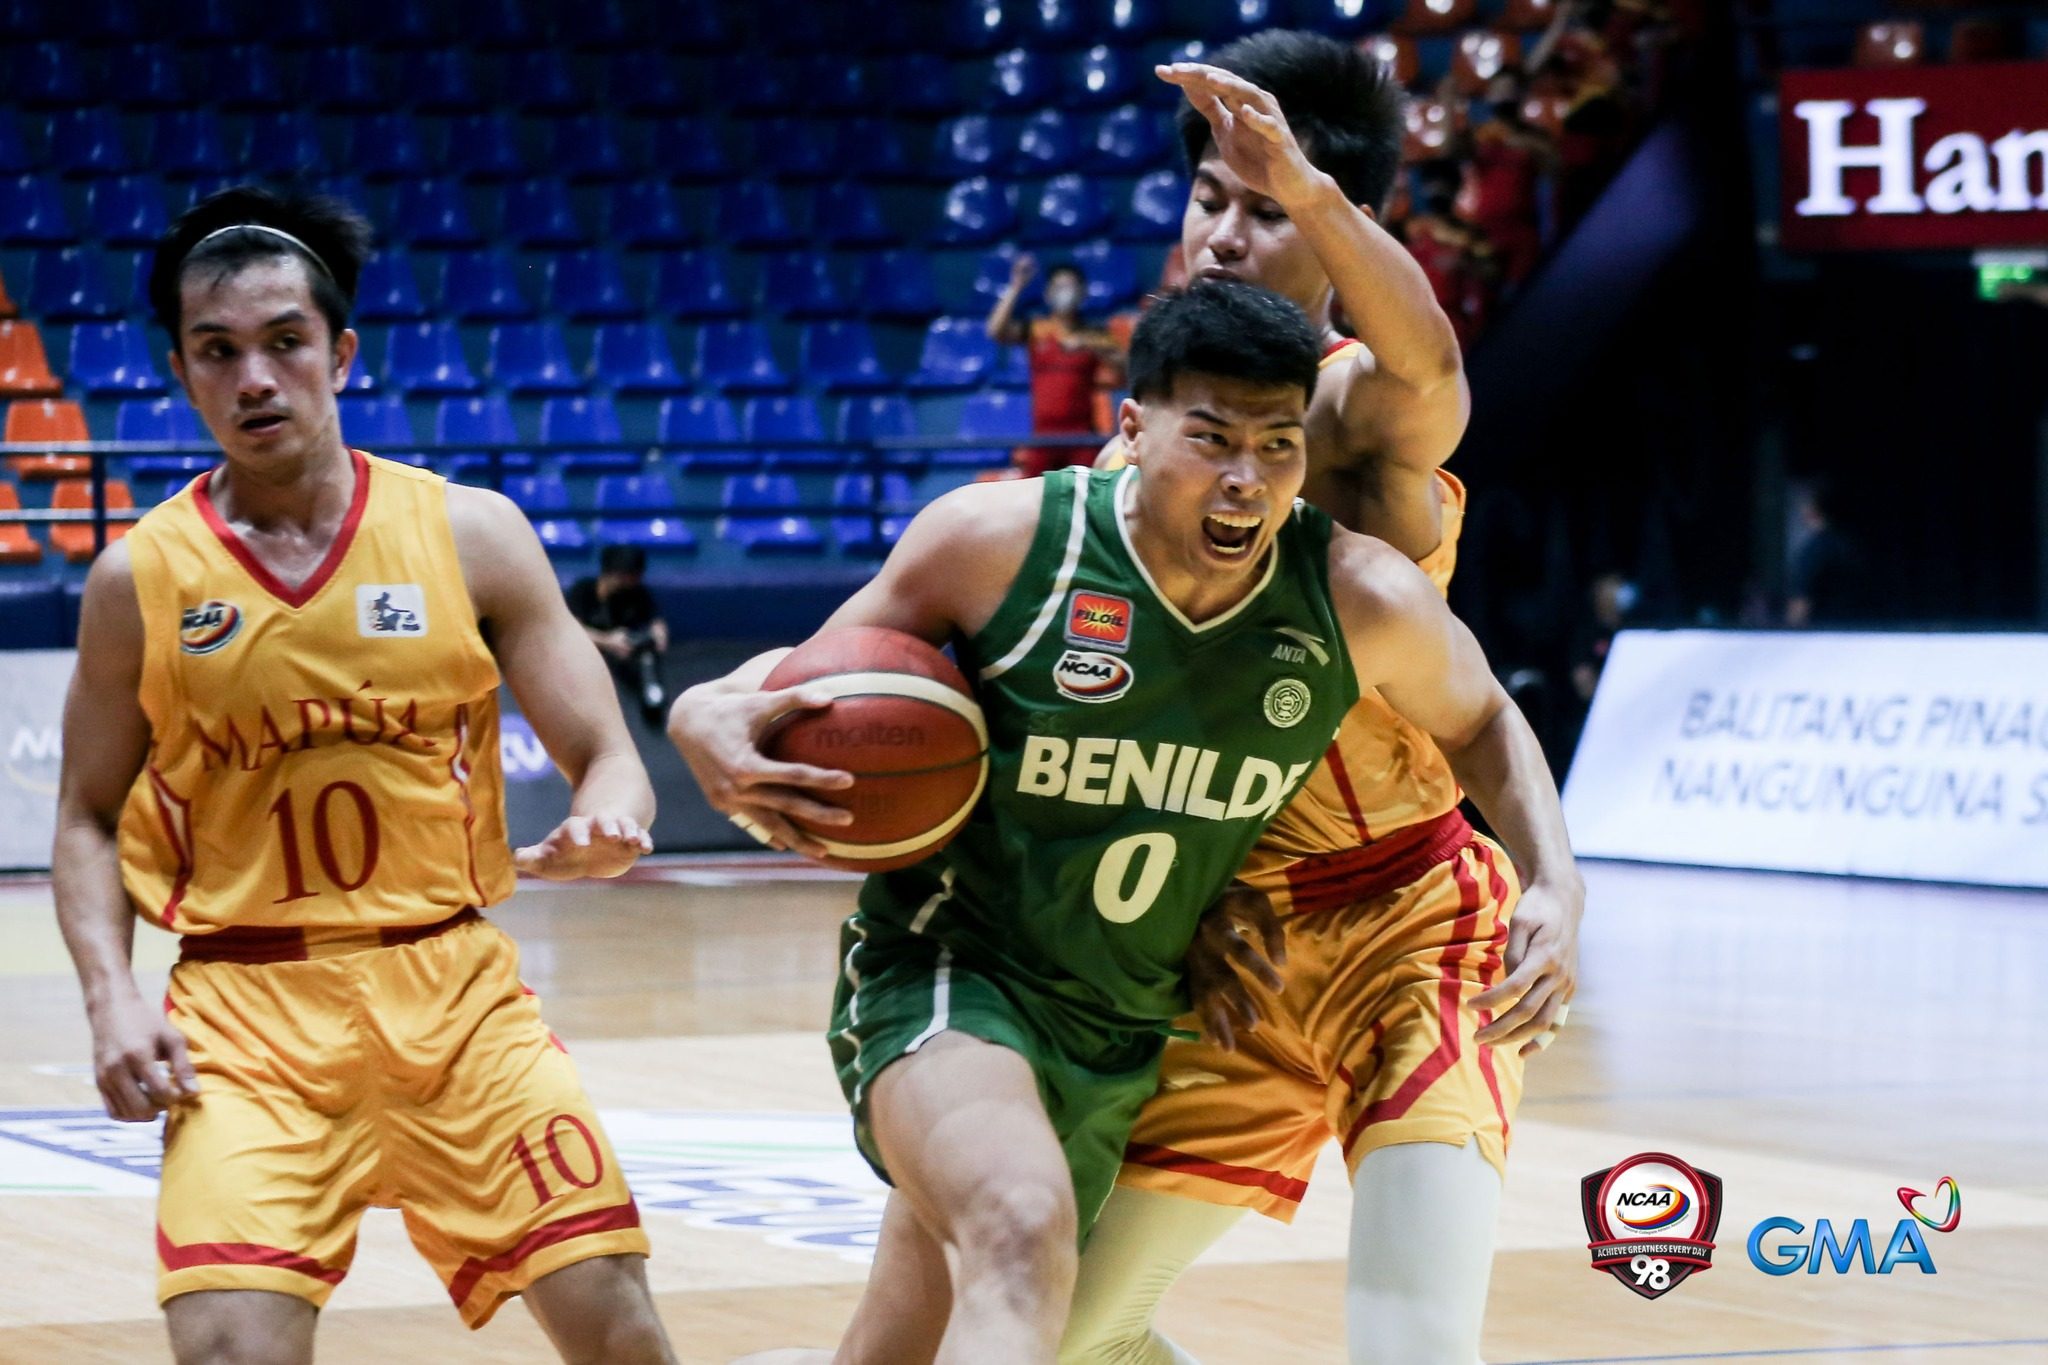 Benilde outlasts embattled Mapua to stay on top; Letran snaps skid